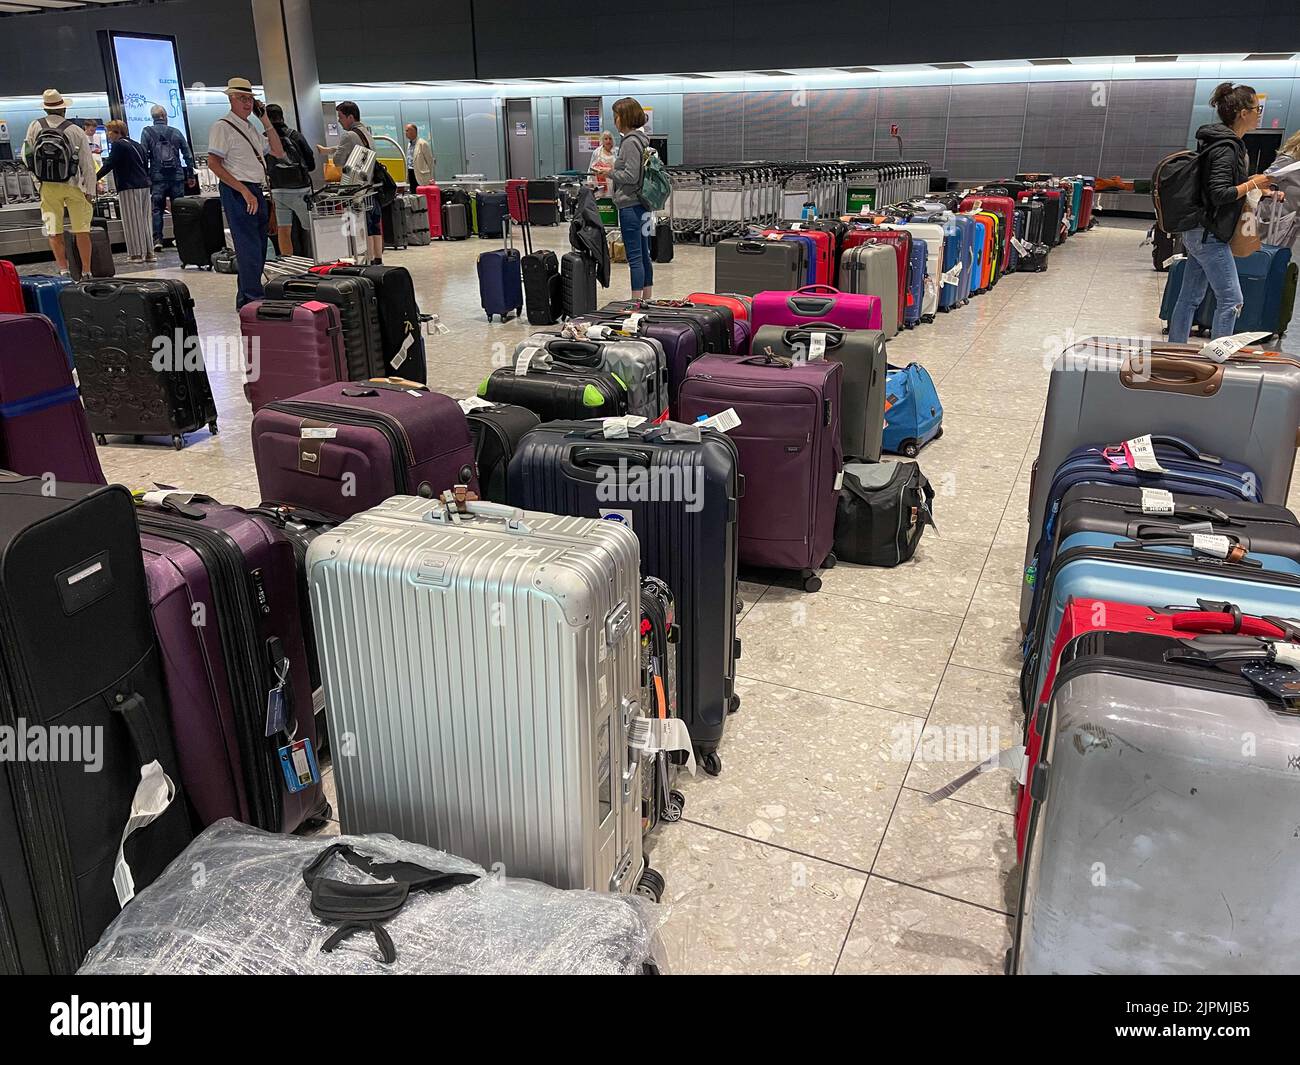 The picture dated August 17 2022 shows piles of uncollected suitcases at Heathrow Airport as the airport chaos continues Stock Photo